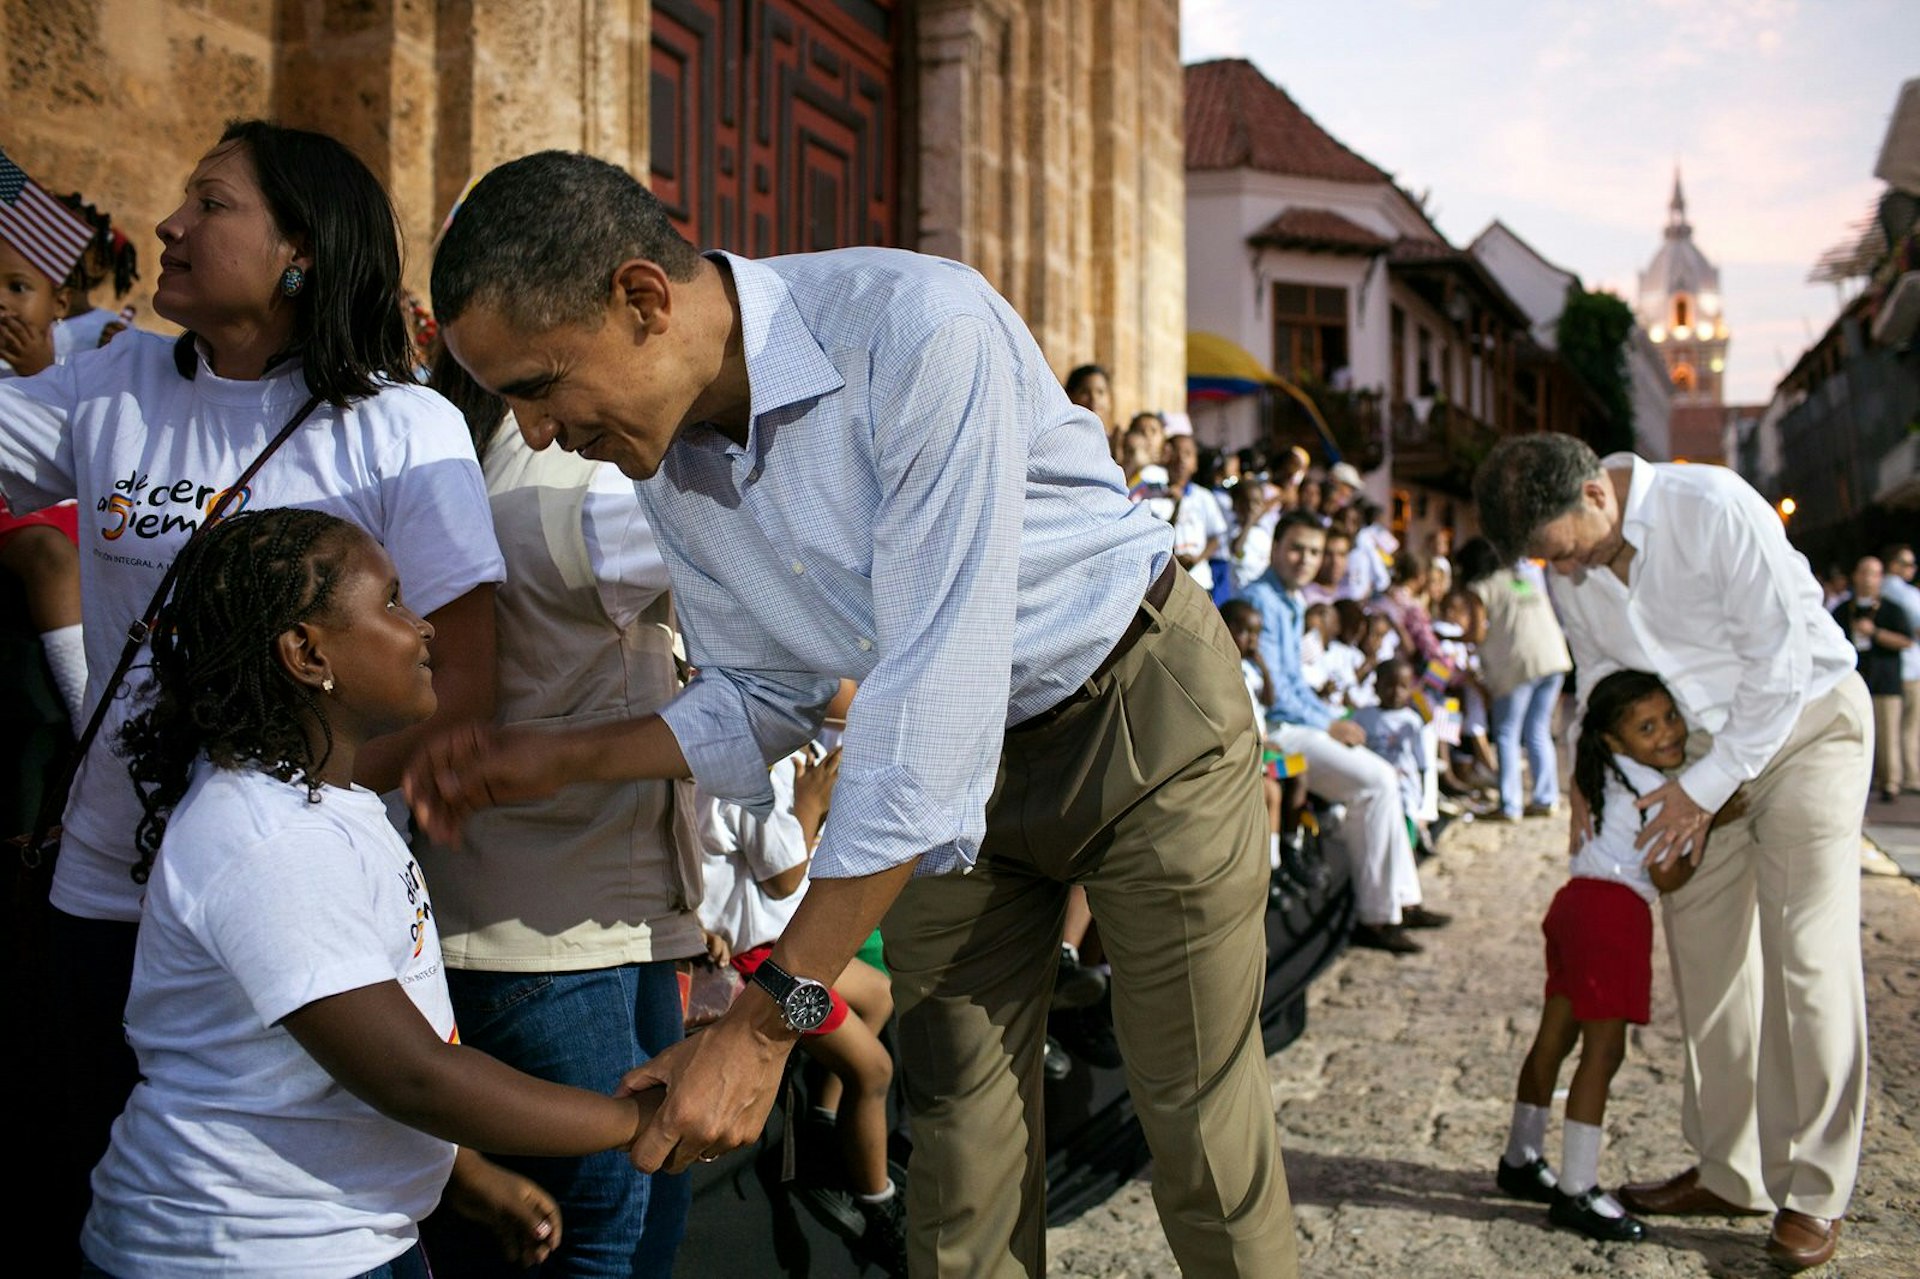 President Obama greeting a young girl at the Plaza de San Pedro, Cartagena, Colombia, during the Summit of the Americas, April 15, 2012 © Pete Souza / Official White House Photo